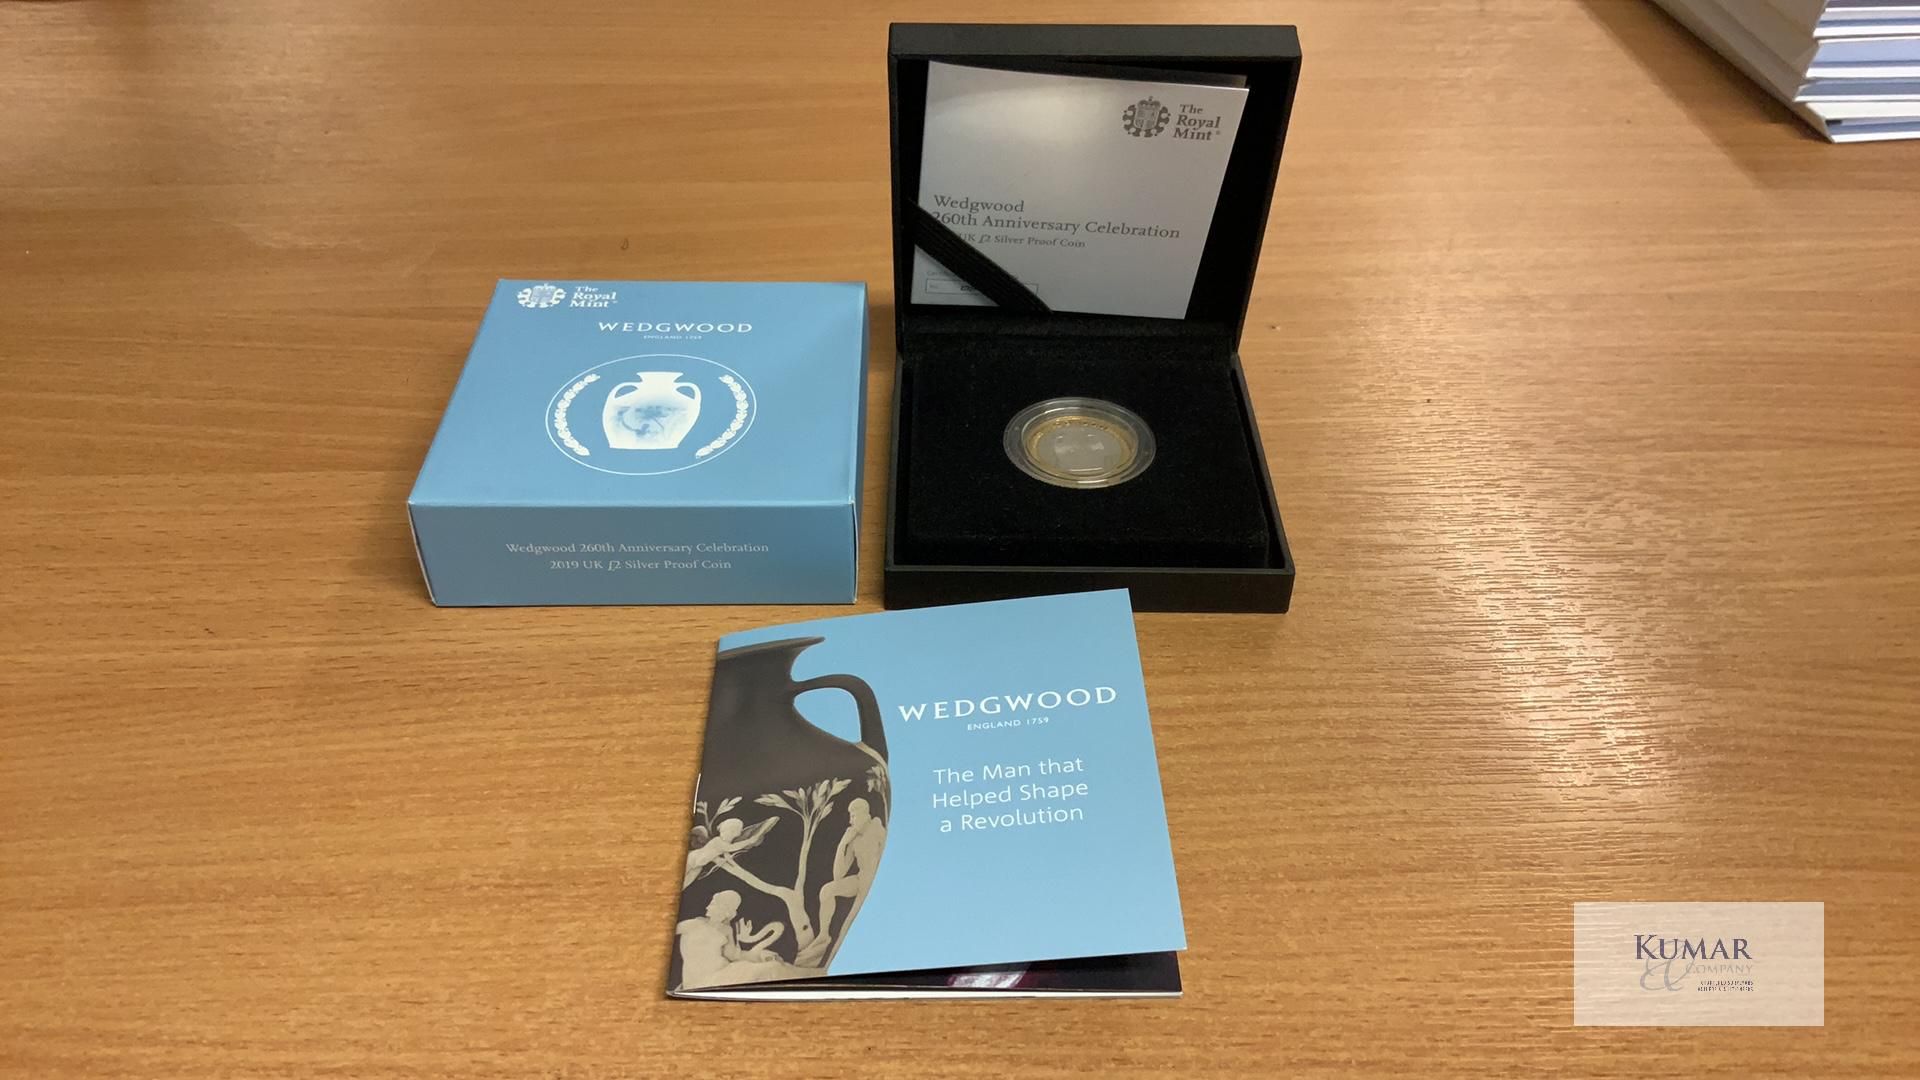 The Royal Mint Coin- Wedgwood 260th Anniversary Celebration 2019 UK £2 Silver Proof Coin - Bild 2 aus 4